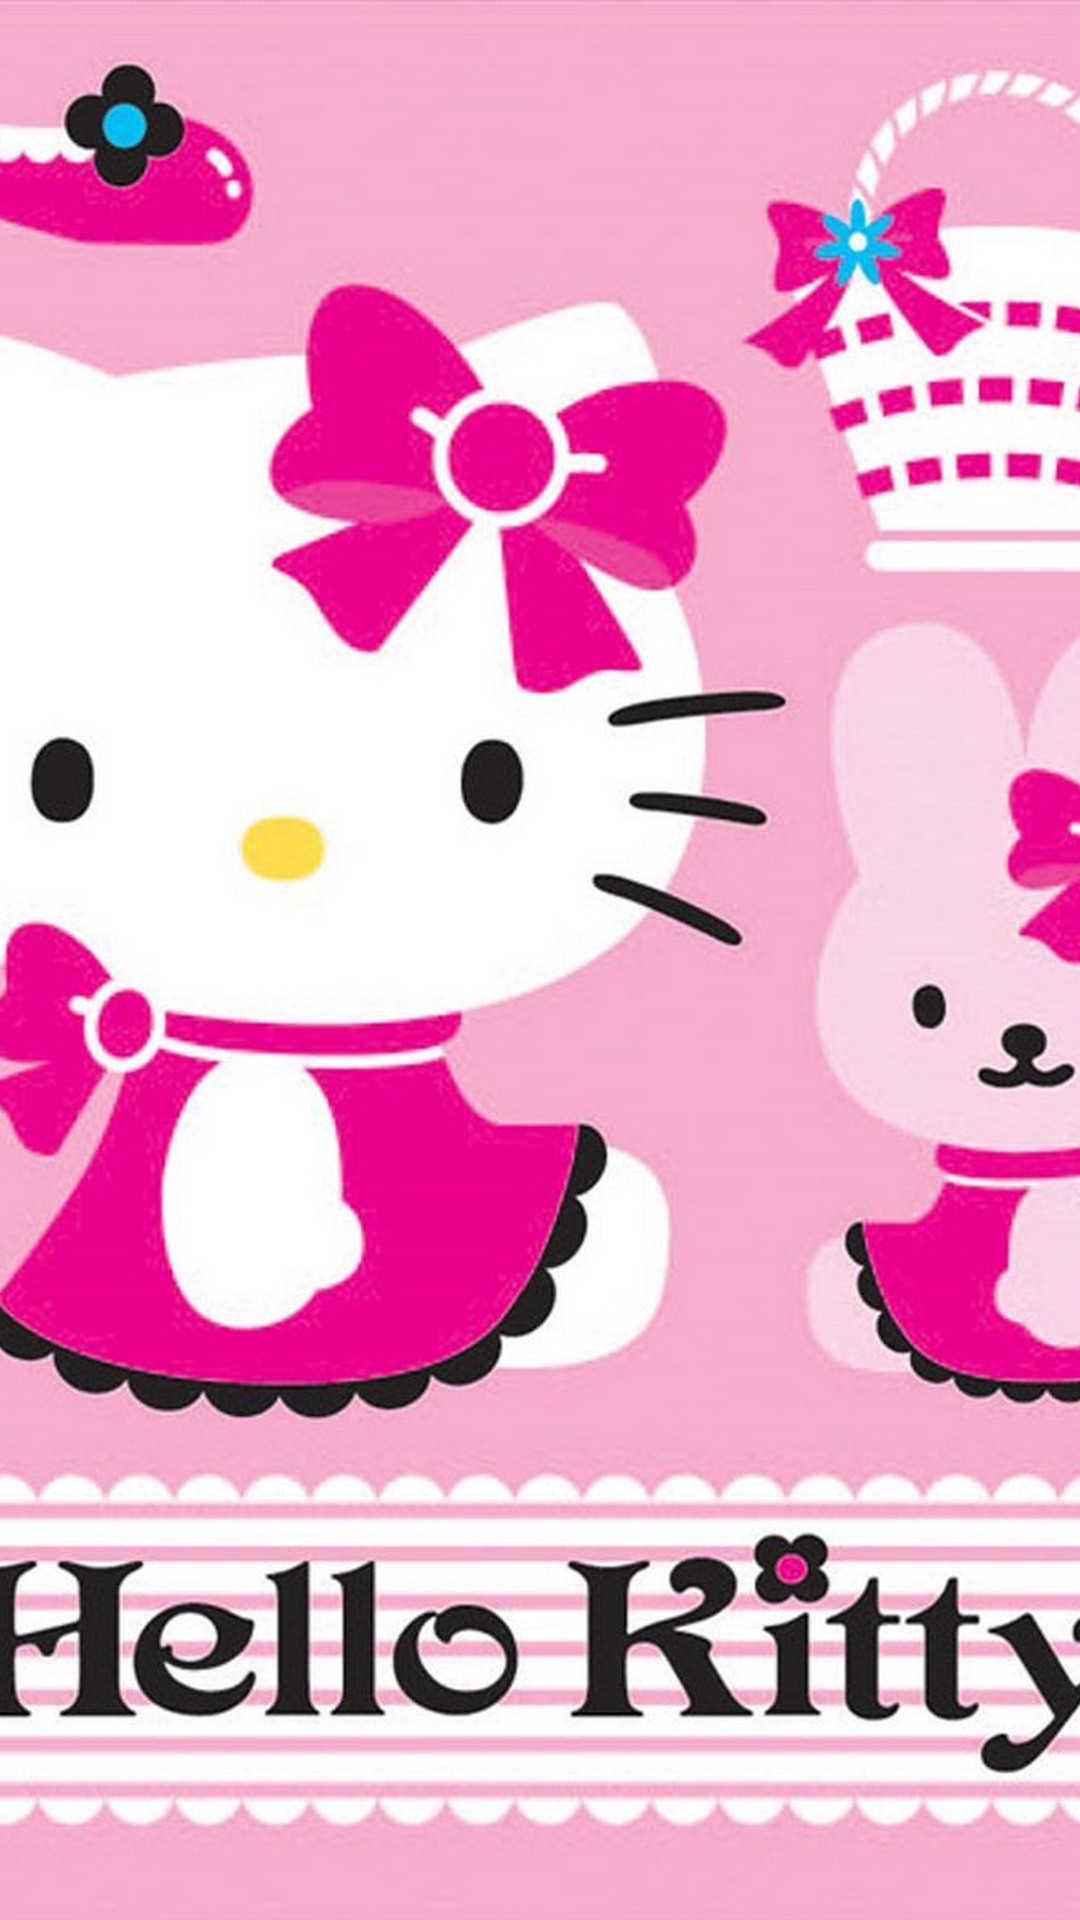 Wallpaper Hello Kitty Android With Image Resolution - Hello Kitty Wallpaper Desktop - HD Wallpaper 